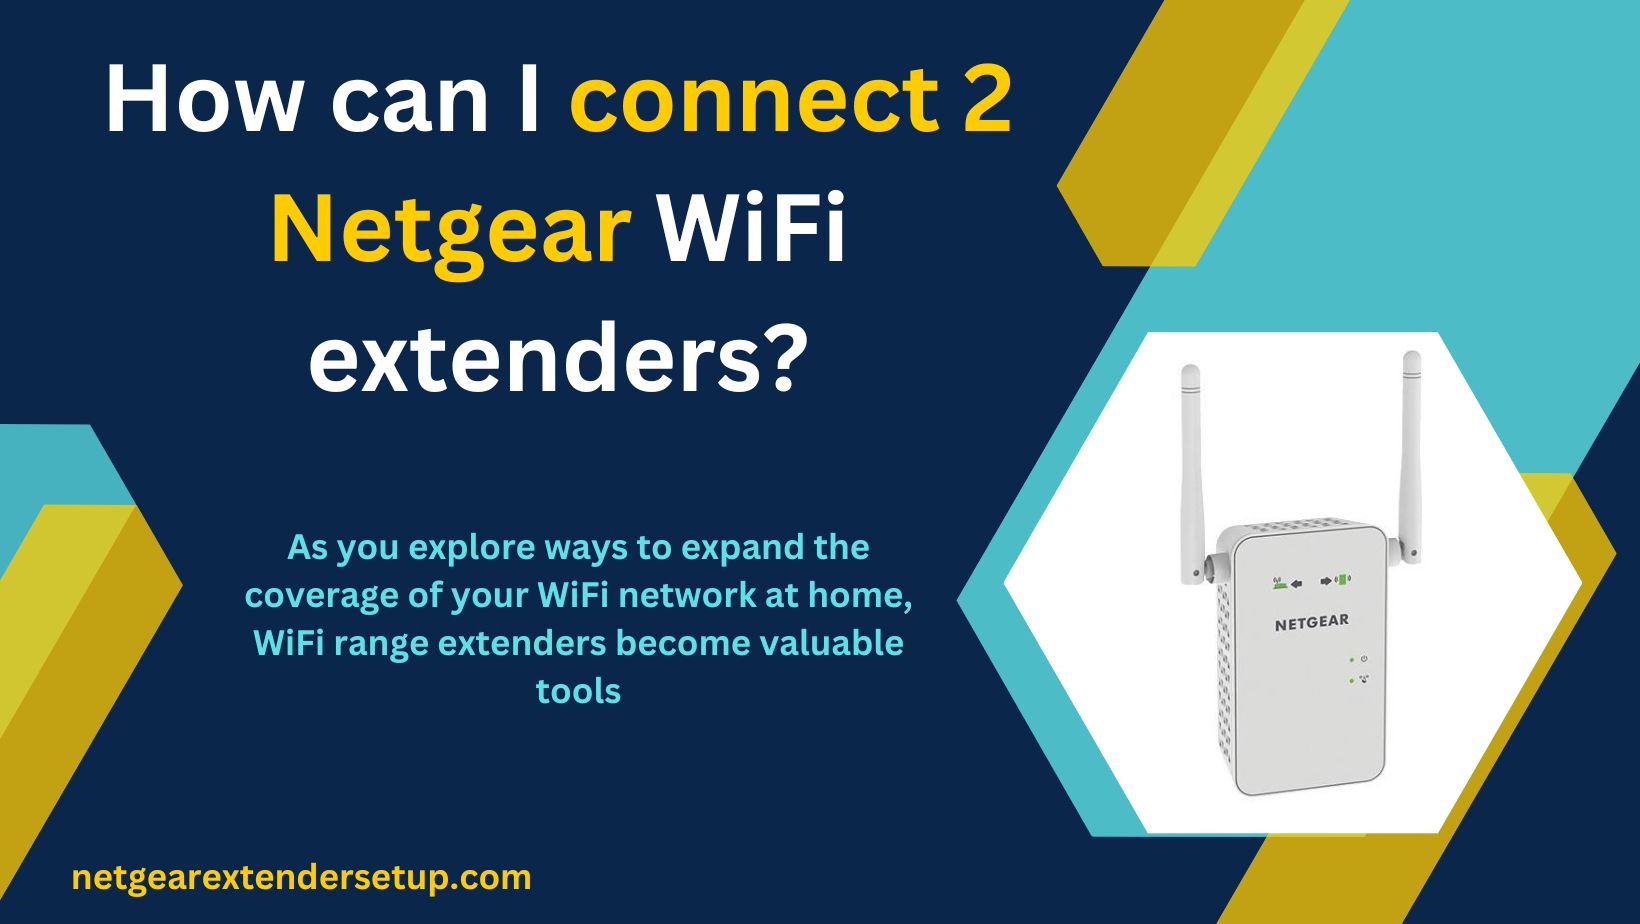 You are currently viewing How can I connect 2 Netgear WiFi extenders?